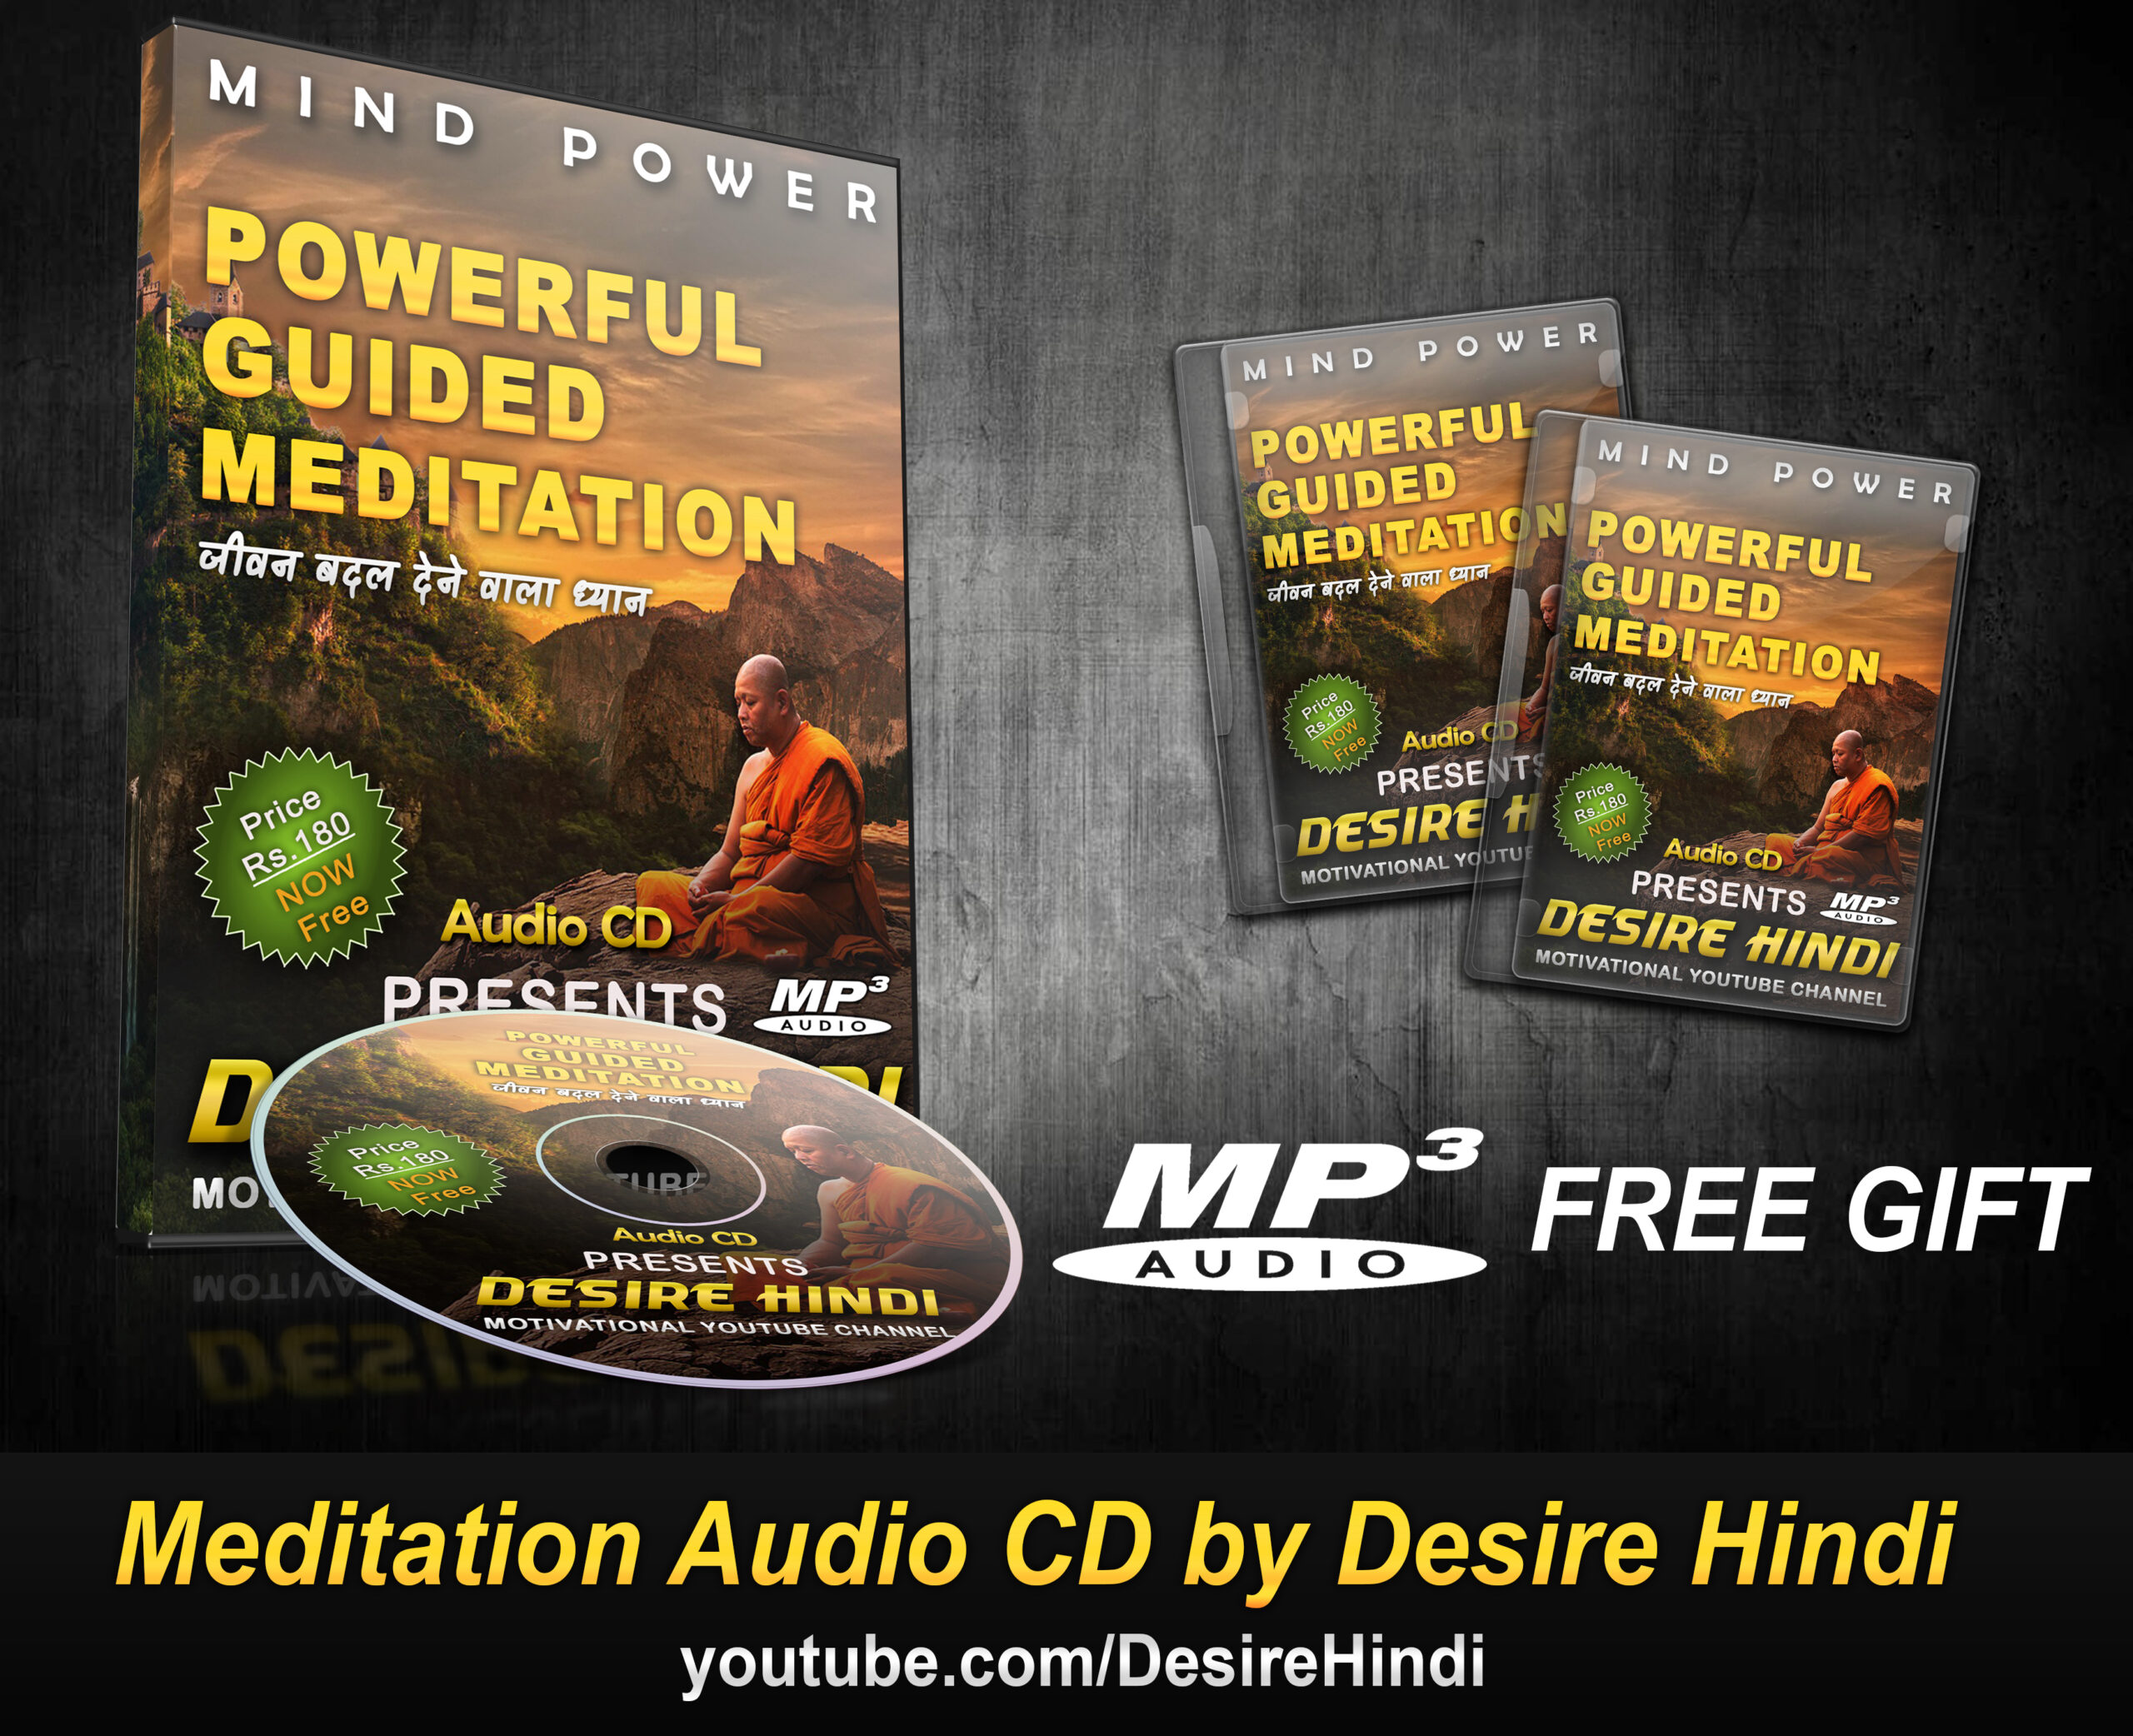 Powerful-Guided-Meditation-By-Desire-Hindi-Free-Audio-CD-Gift-by-Desire-Hindi